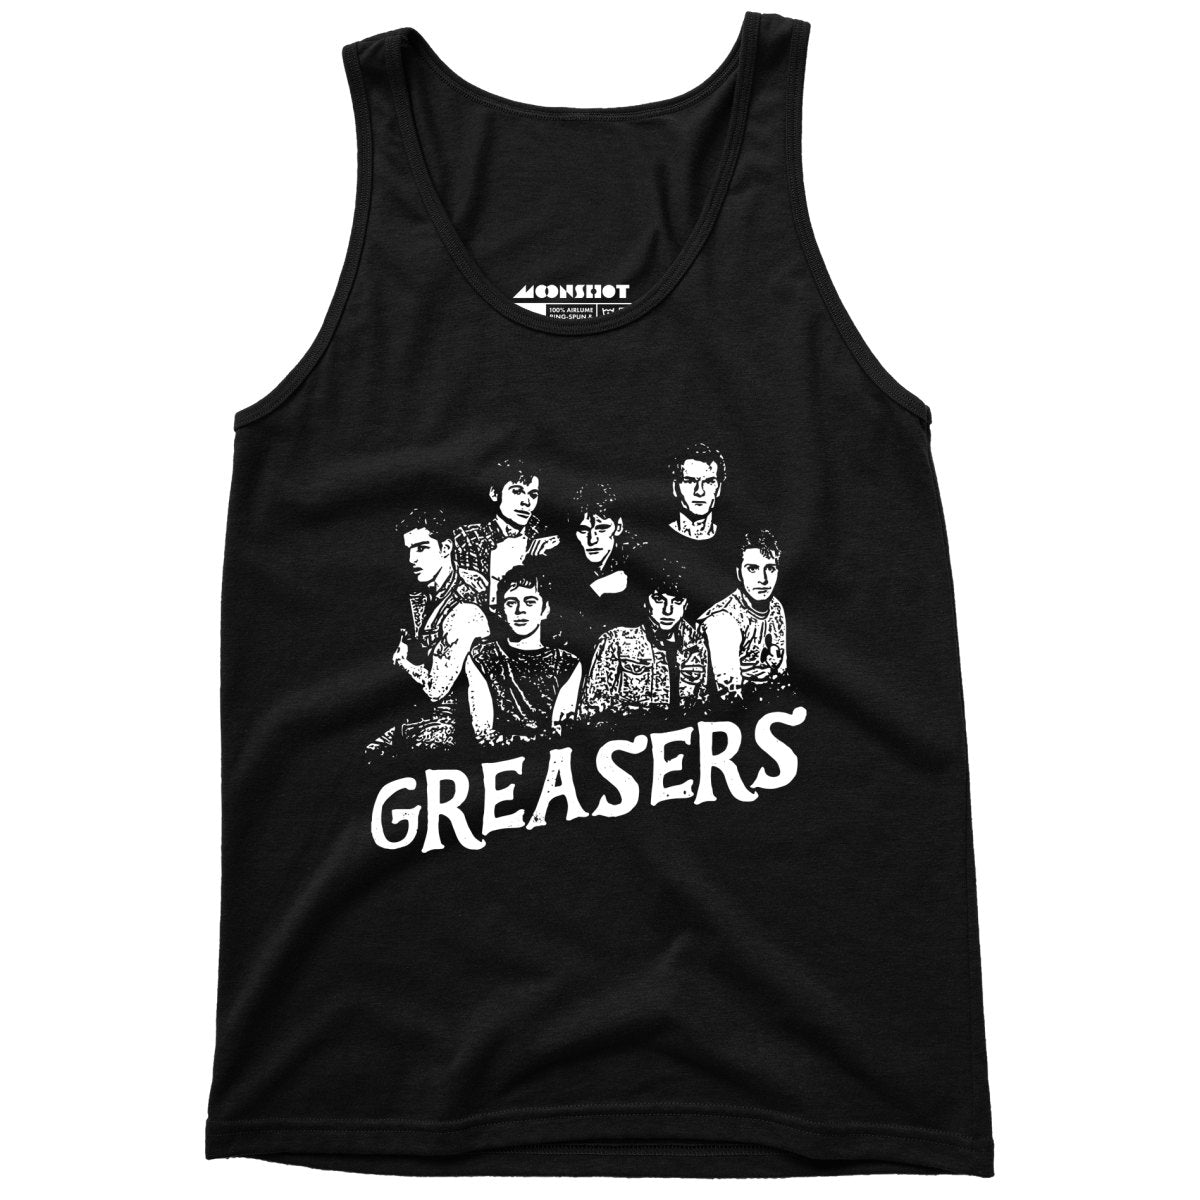 Greasers - Unisex Tank Top